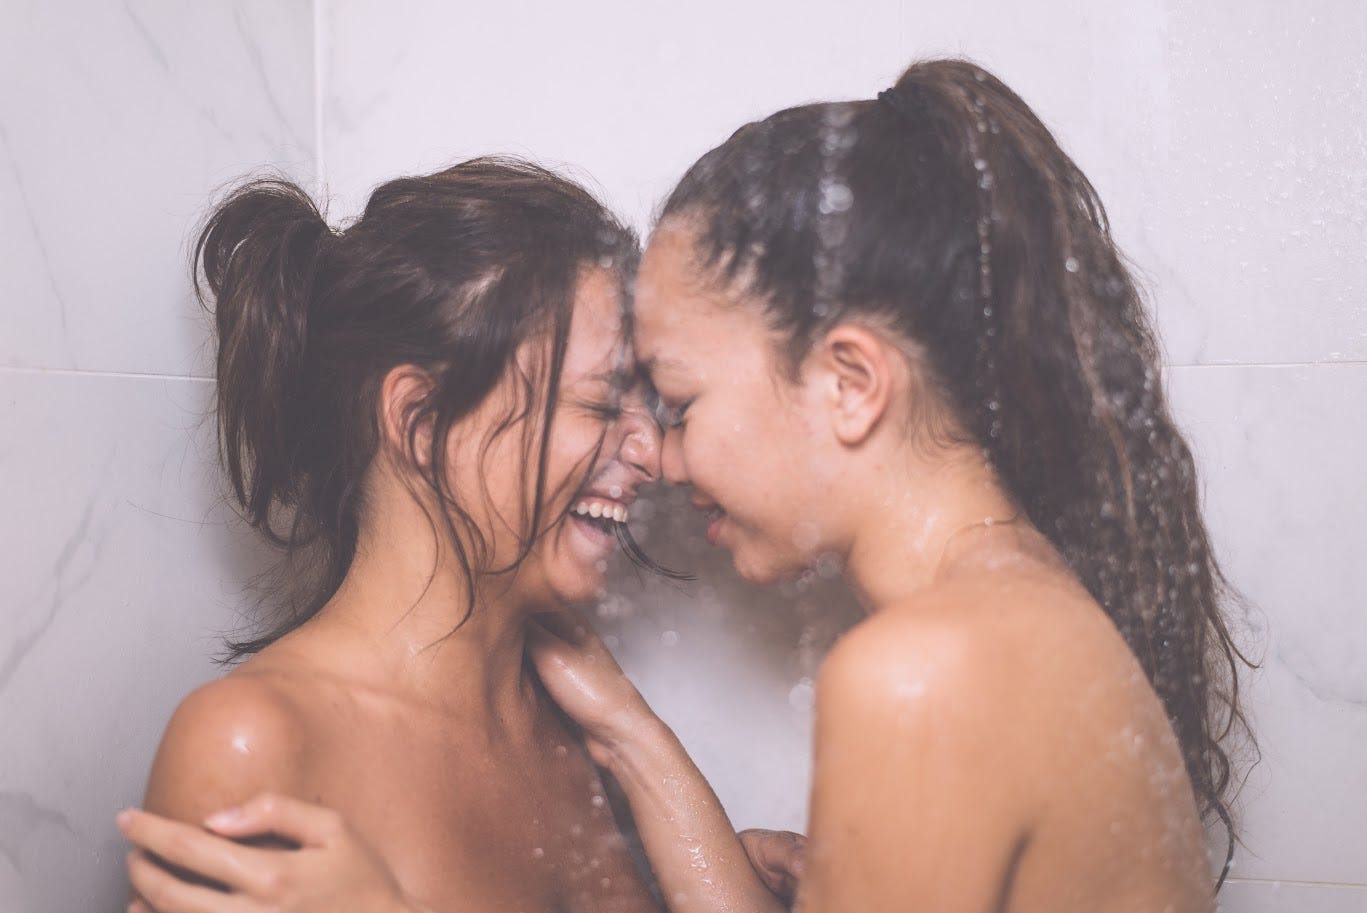 Two women in the shower together